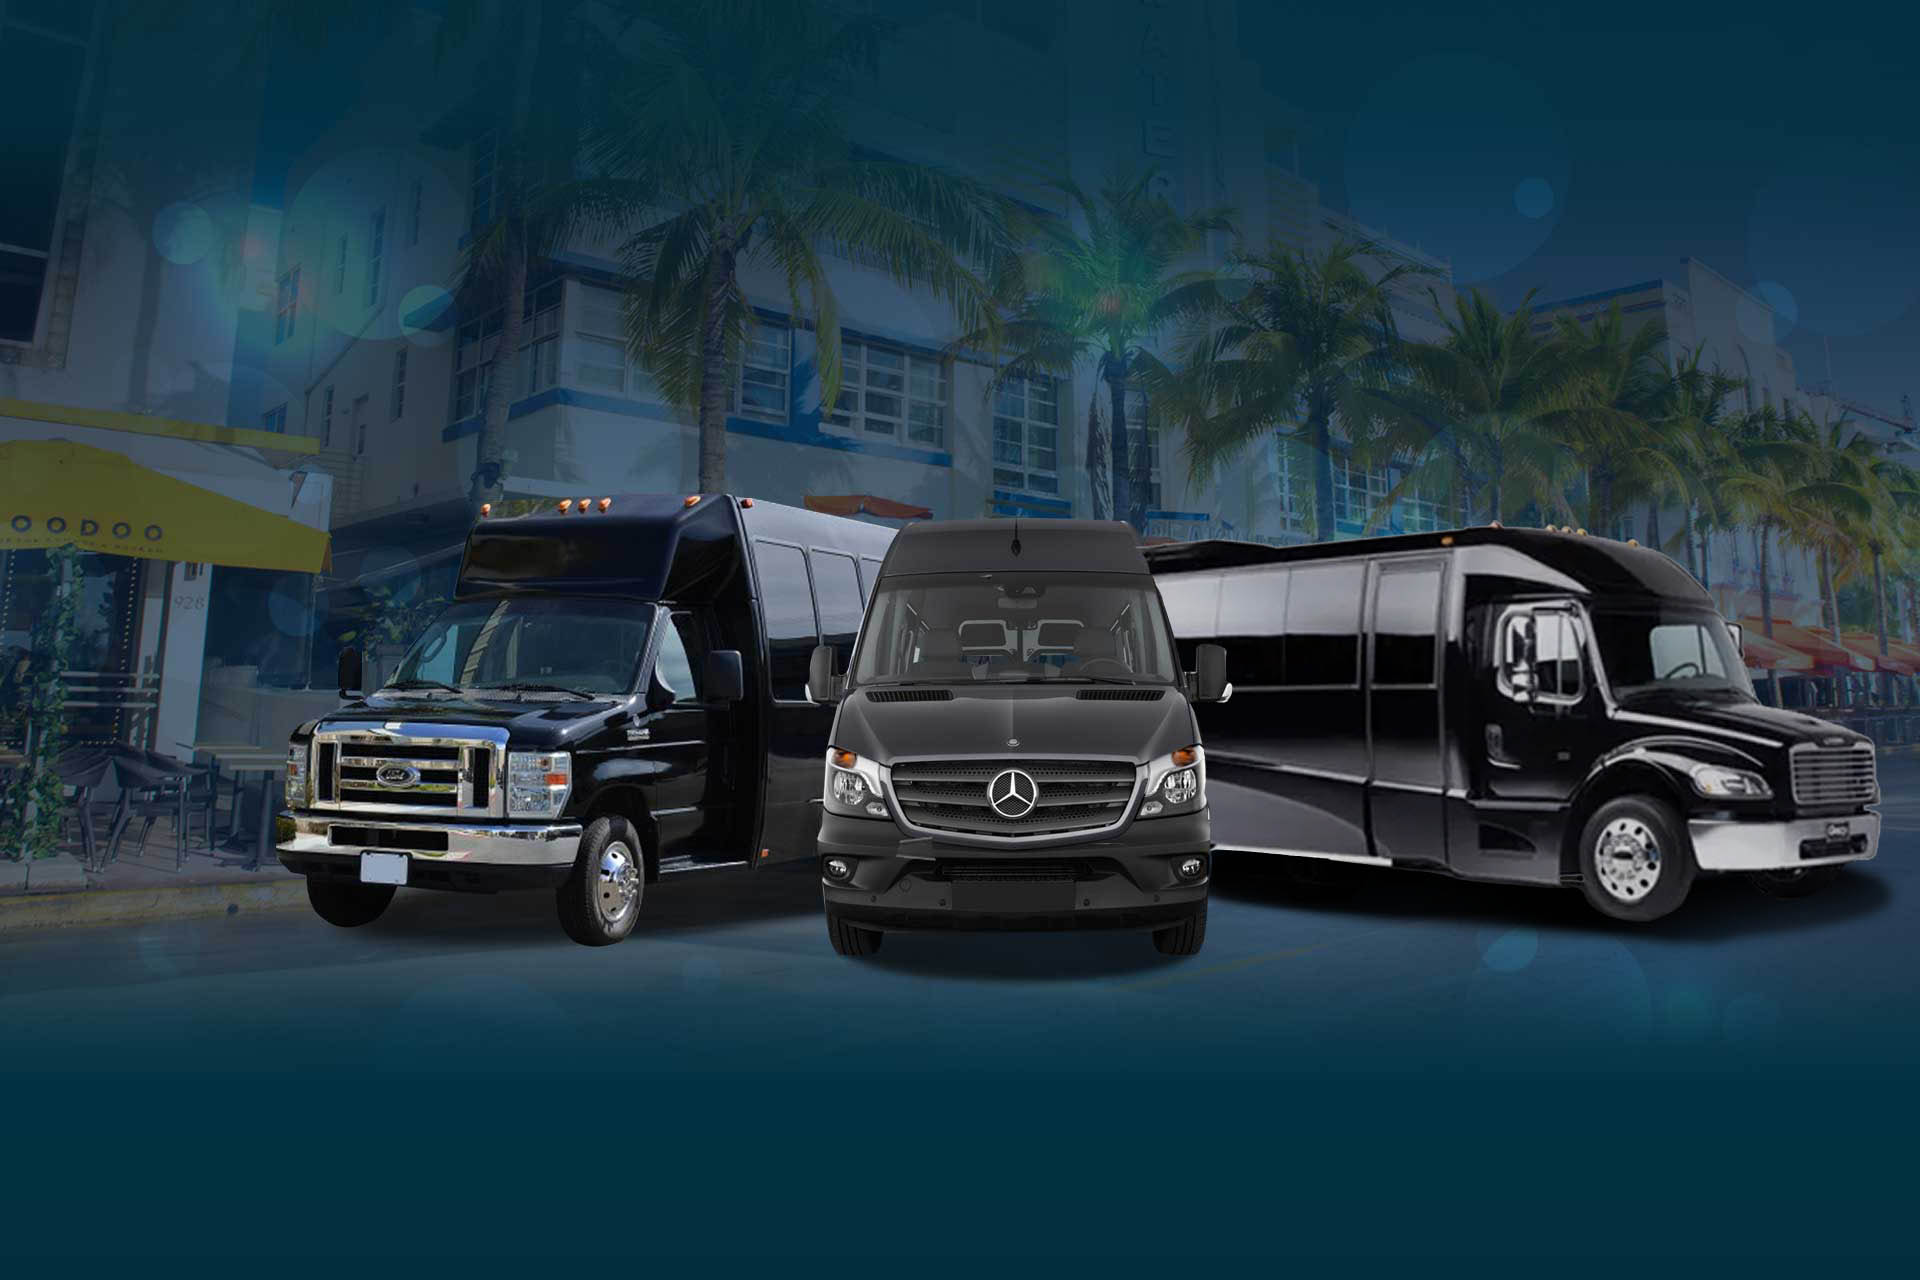 Black Tie XL Limousines | Buses Pro | Airport & Port Transportation | Charters, Transfers, Shuttle | Miami, West Palm Beach, Ft. Lauderdale, Hollywood, Key West, Orlando, Tampa